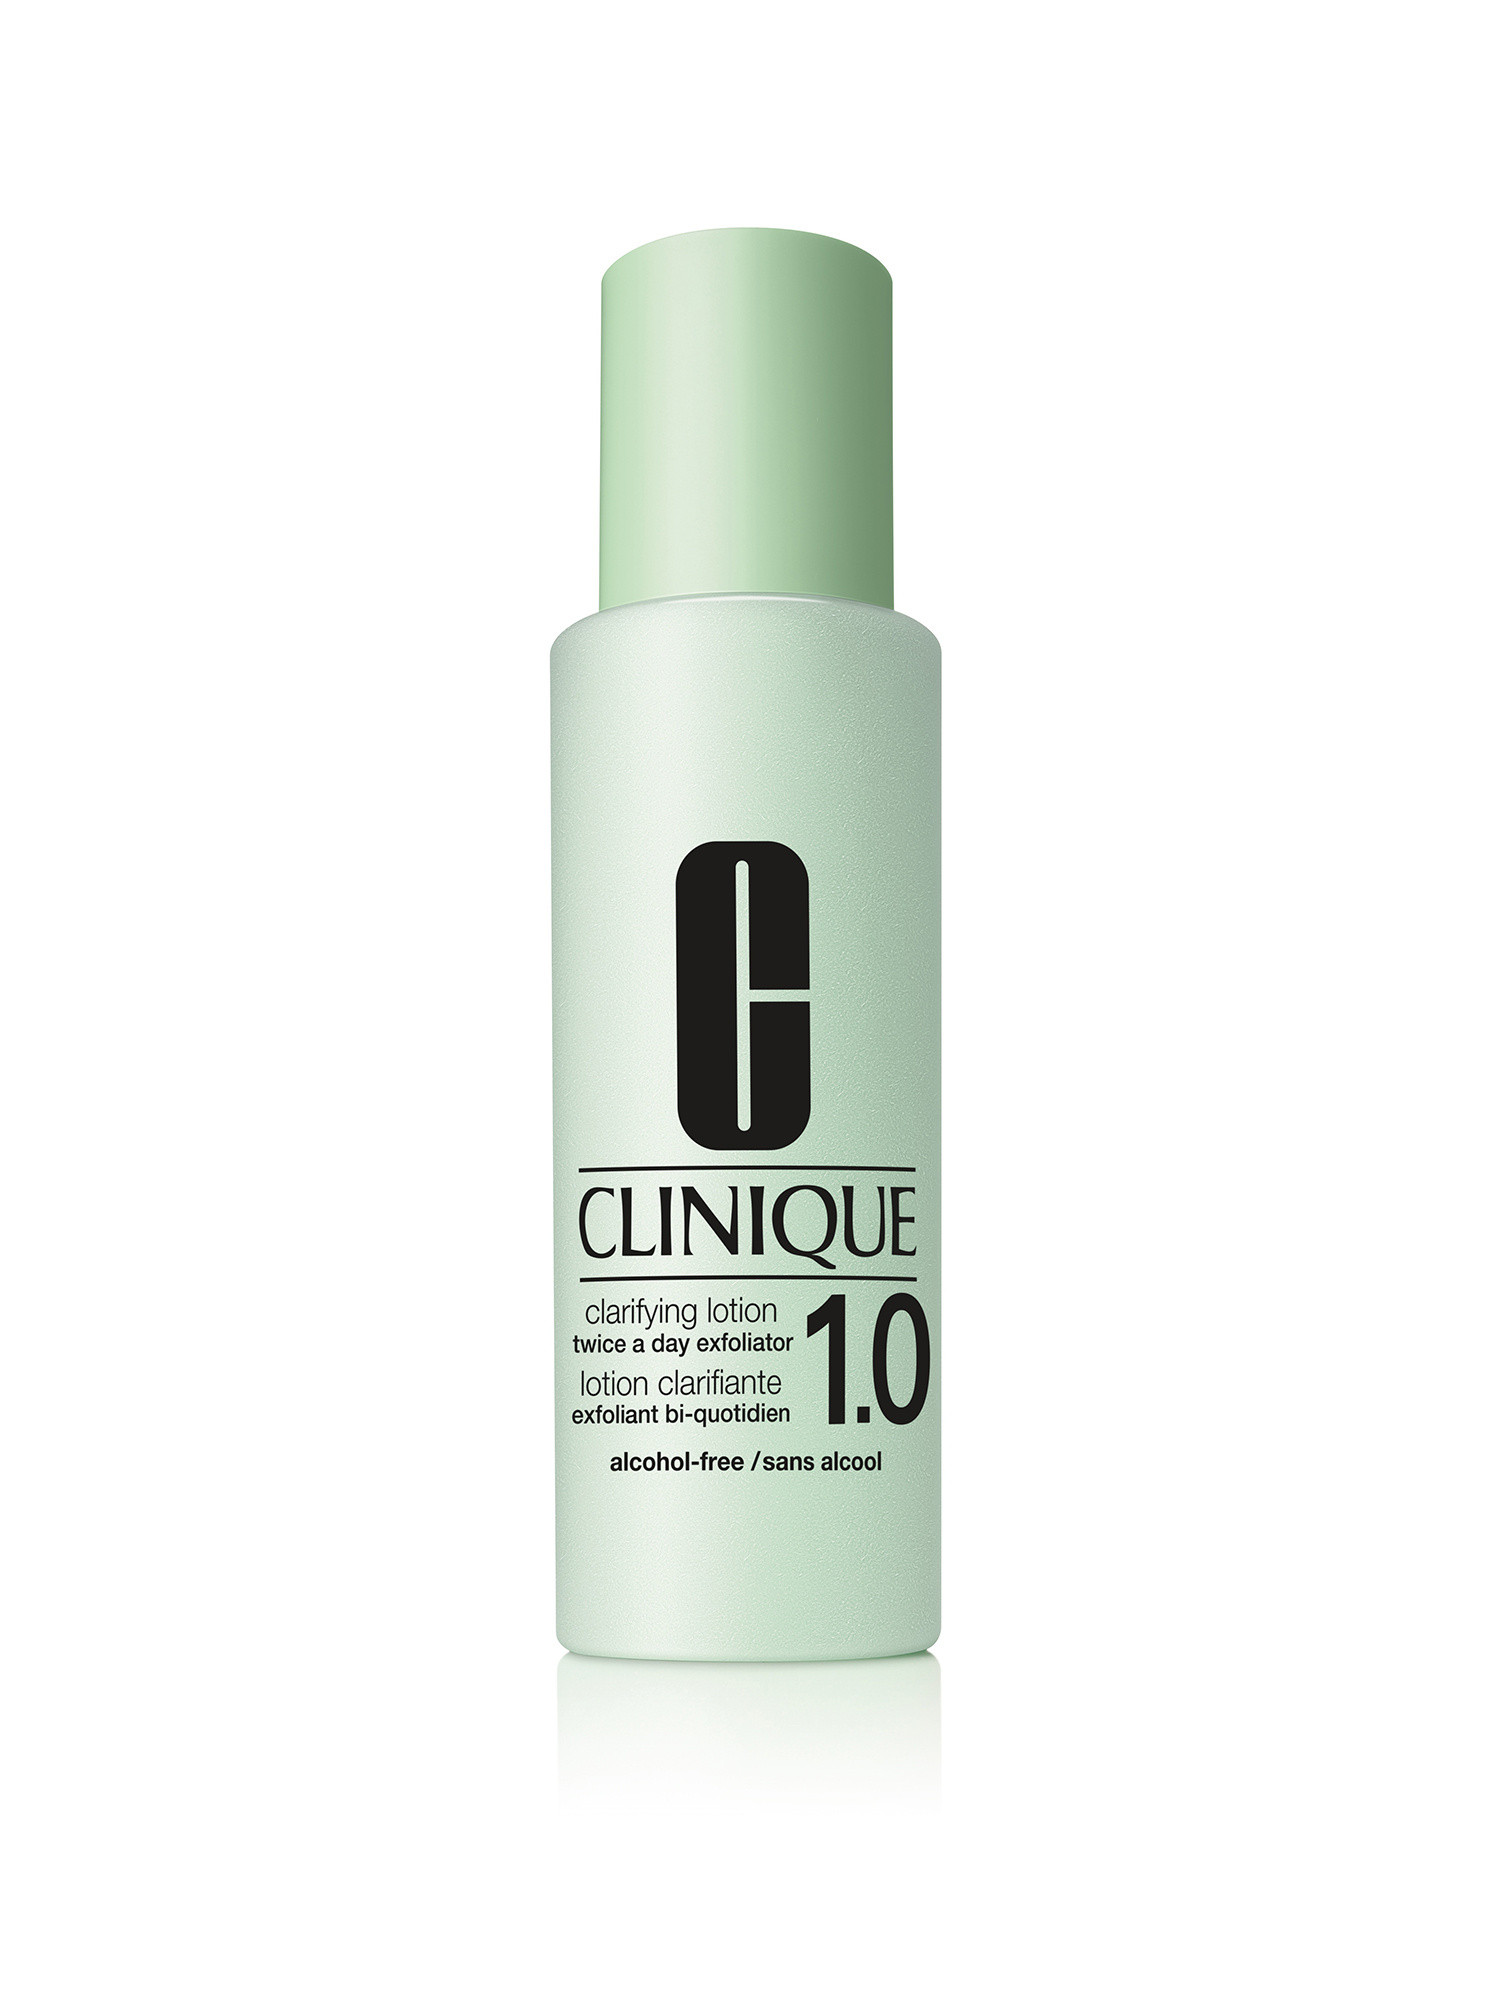 Clinique clarifying lotion 1.0 priva di alcool - 200 ml, Verde, large image number 0